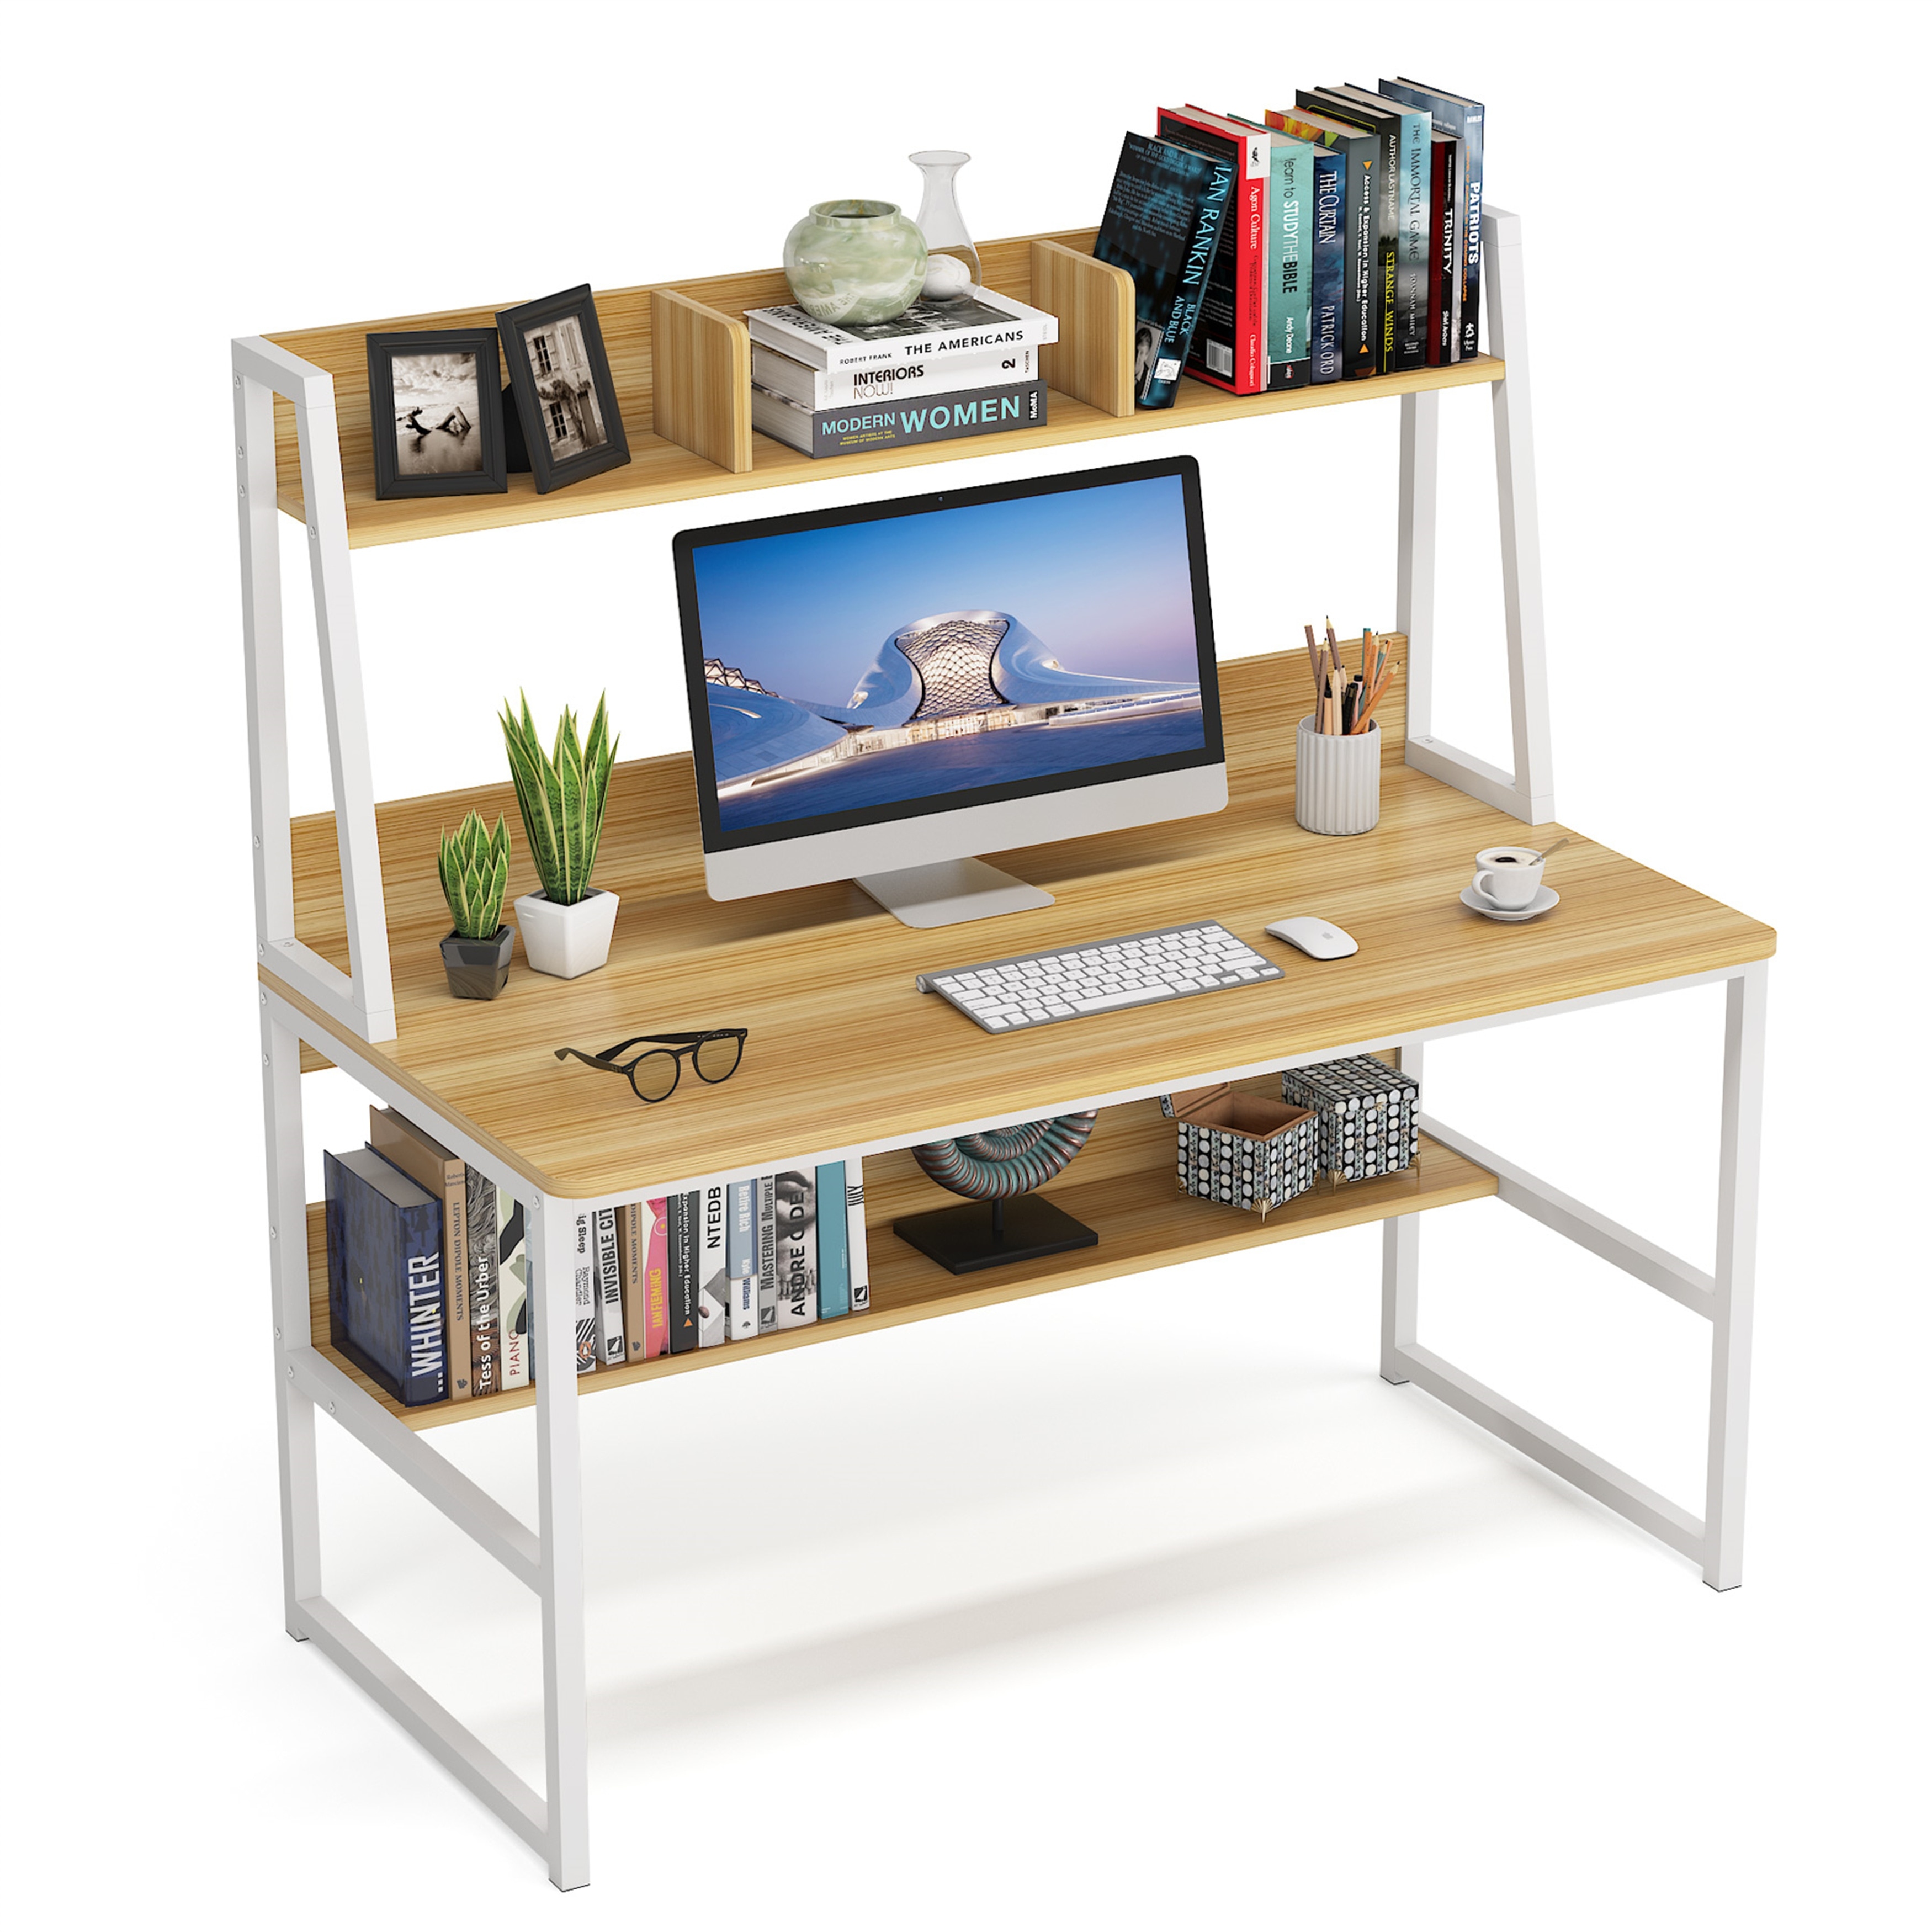 https://ak1.ostkcdn.com/images/products/is/images/direct/80196b2198e1dbbe8dbf32de05c196a06136e21d/47-Inches%C2%A0Computer-Desk-with-Hutch-and-Bookshelf%2C-Home-Office-Desk.jpg